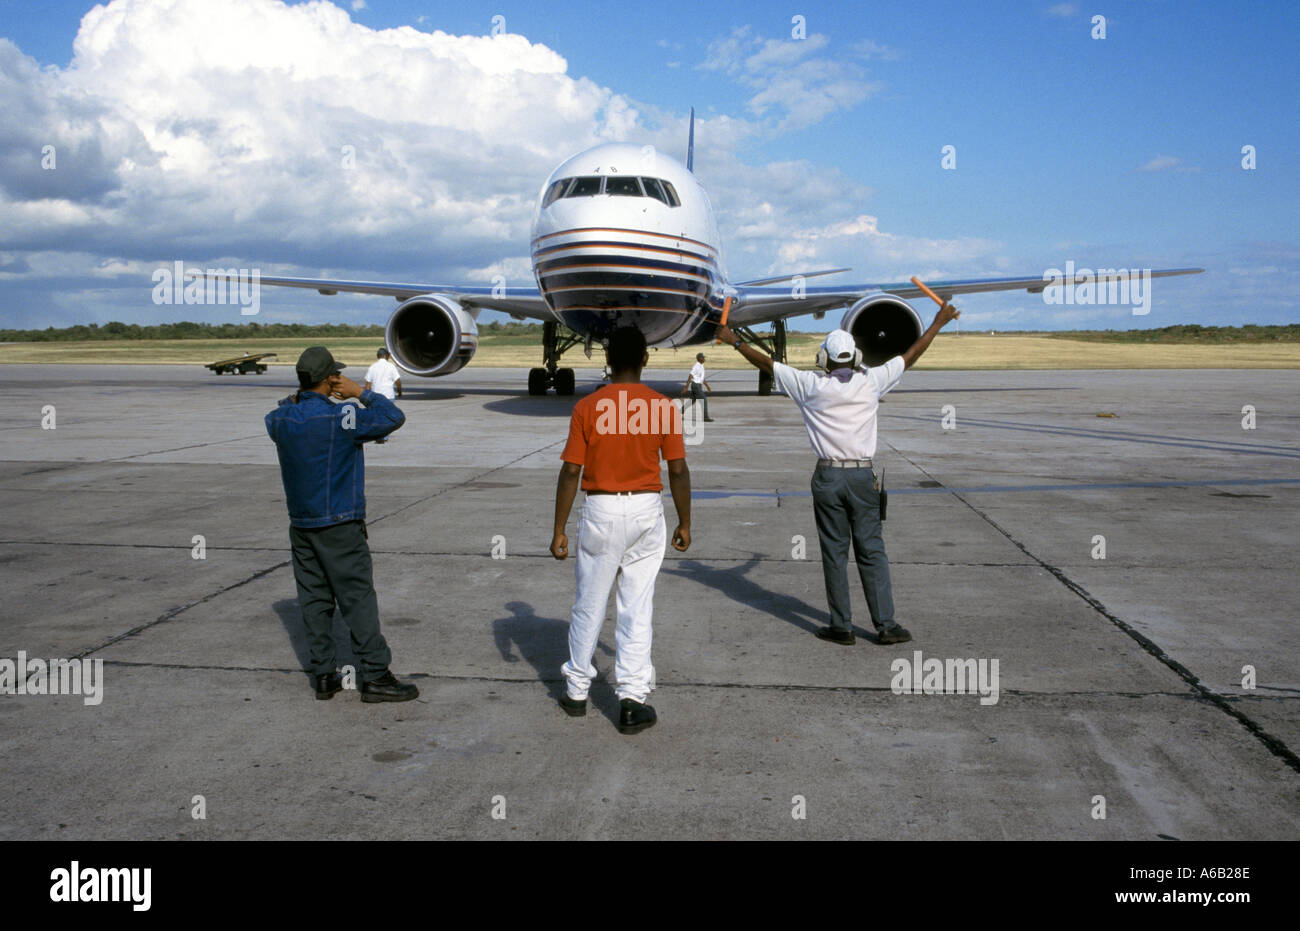 Plane & passengers arrive Santo Domingo Airport Britannia Airways Boeing jet aircraft directed by ground crew & hand held aircraft marshalling signals Stock Photo